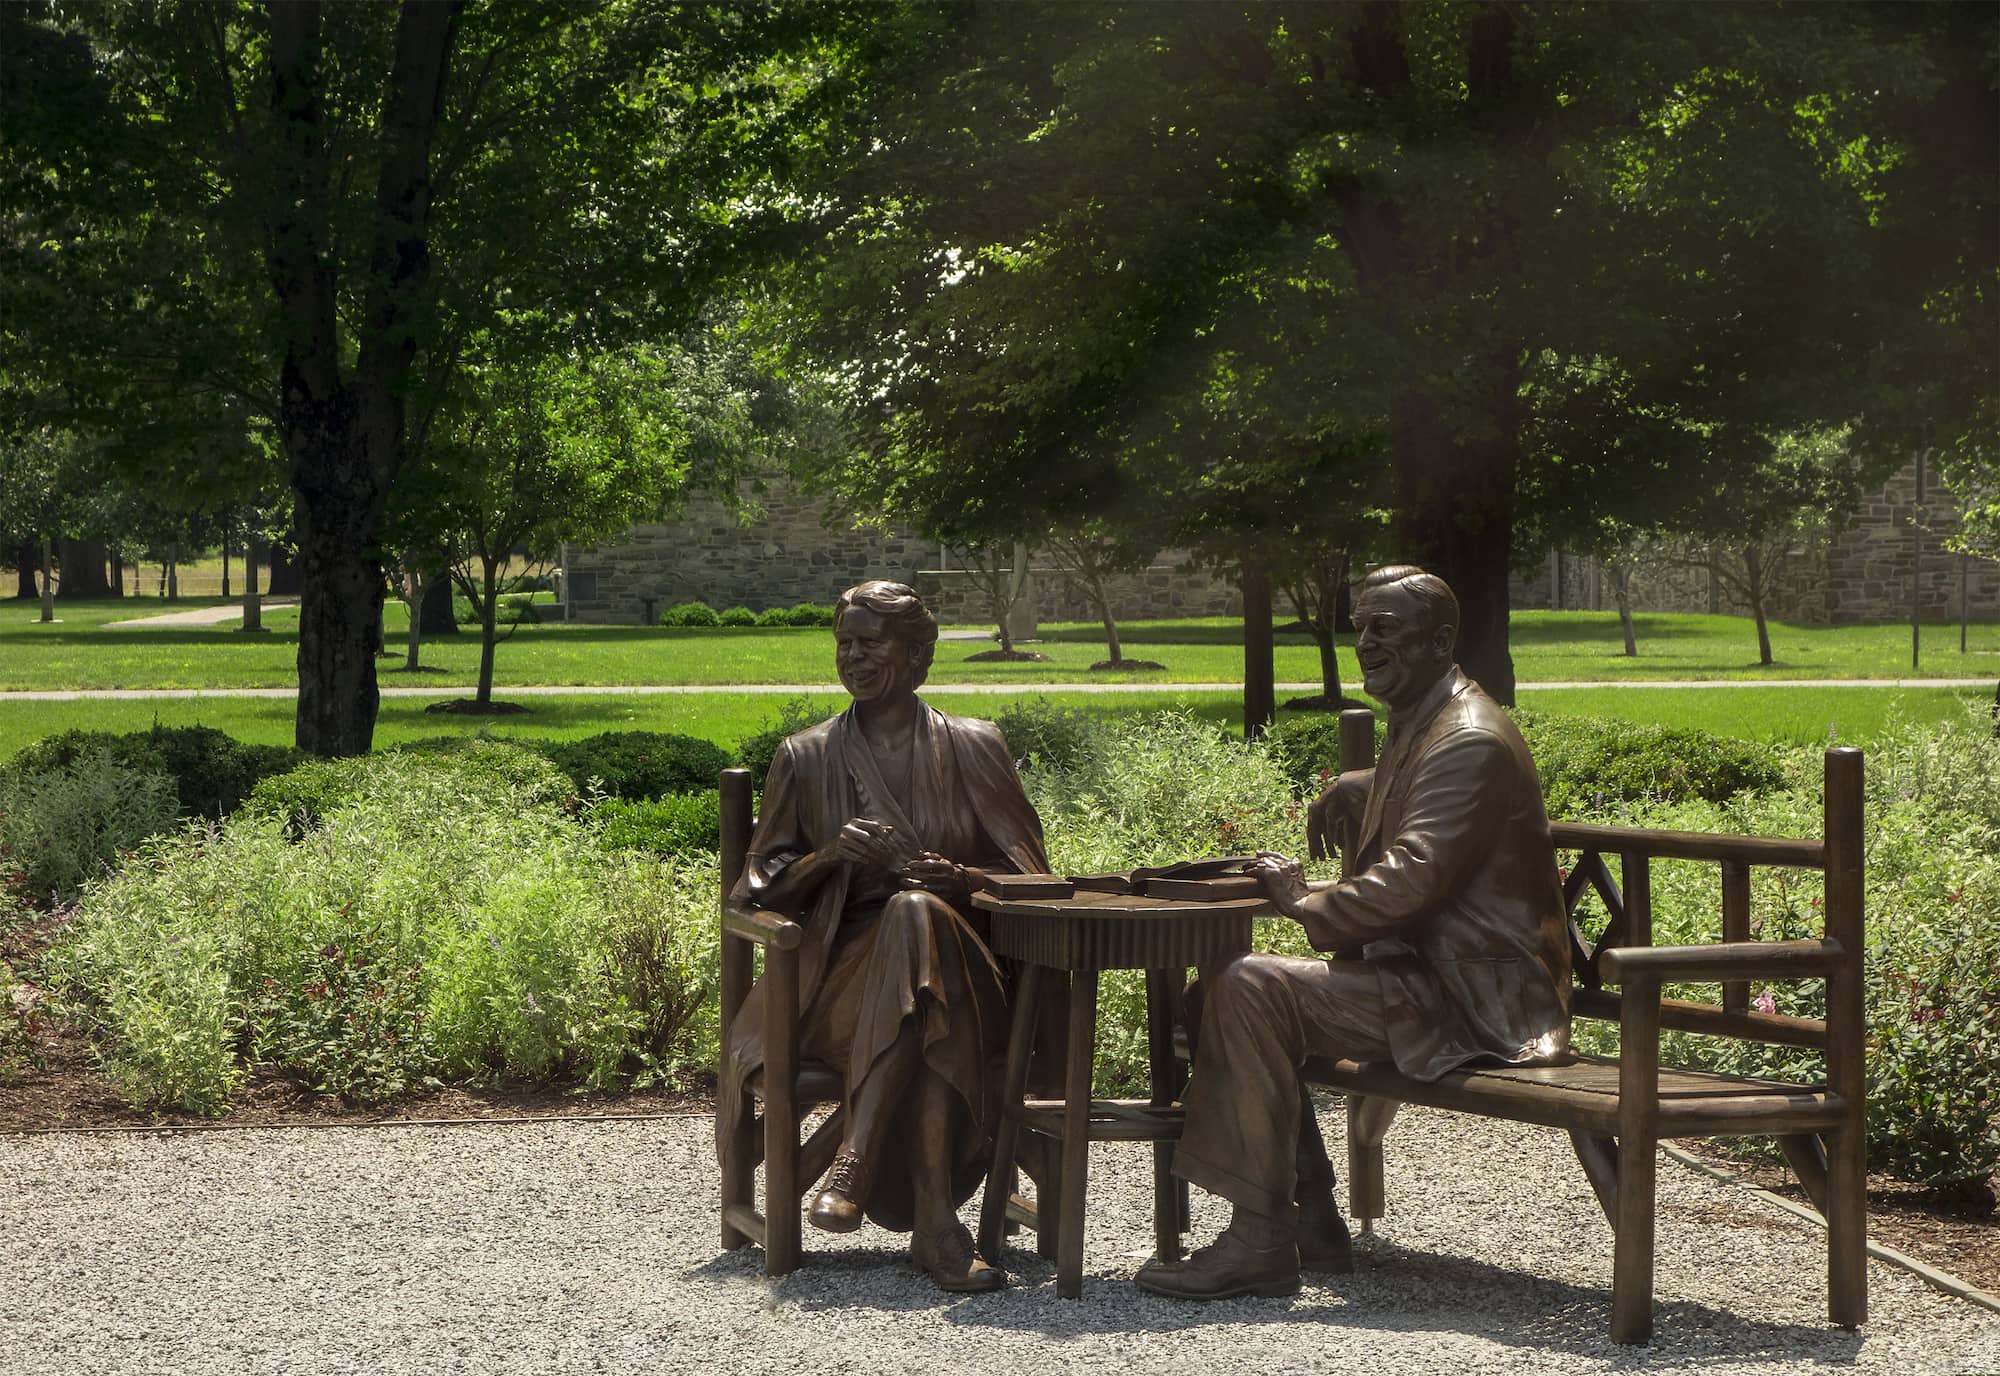 Two metal figures, sculptures of Franklin and Eleanor Roosevelt, sit in a large, outdoor space.